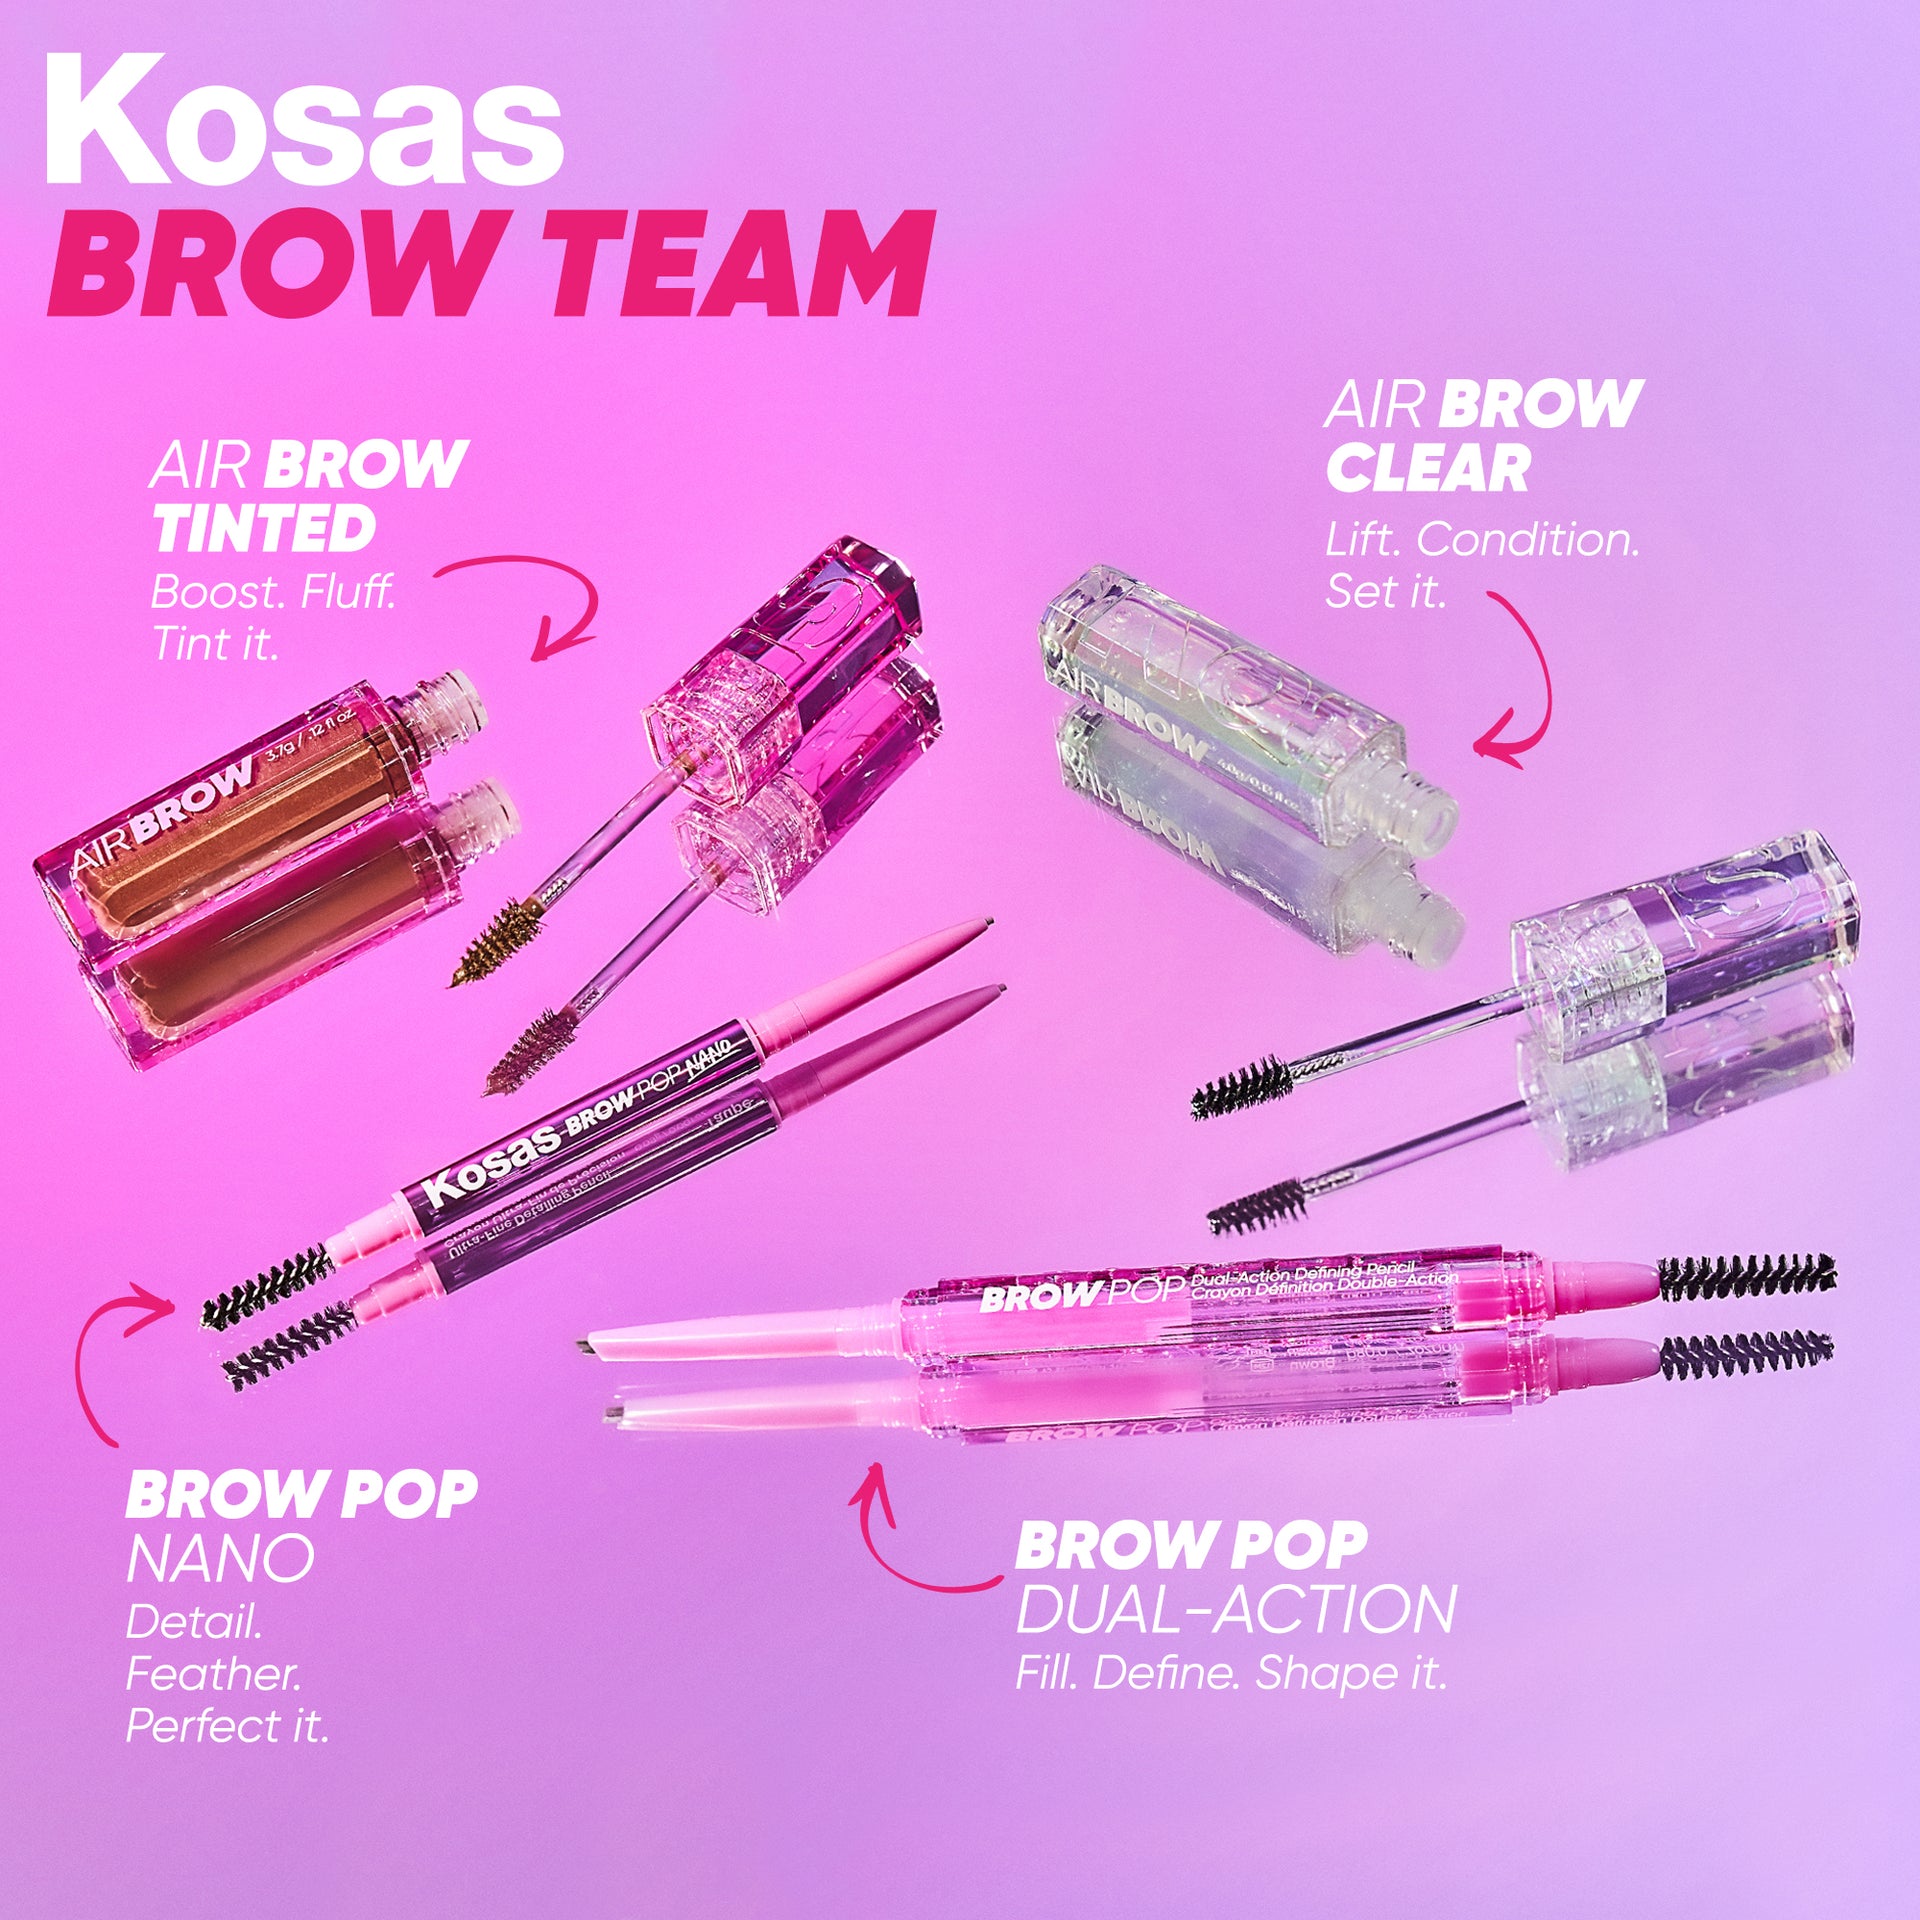 An image showcasing a variety of Kosas eyebrow products, including Air Brow Tinted, Air Brow Clear, Brow Pop Nano, and Brow Pop Dual-Action.